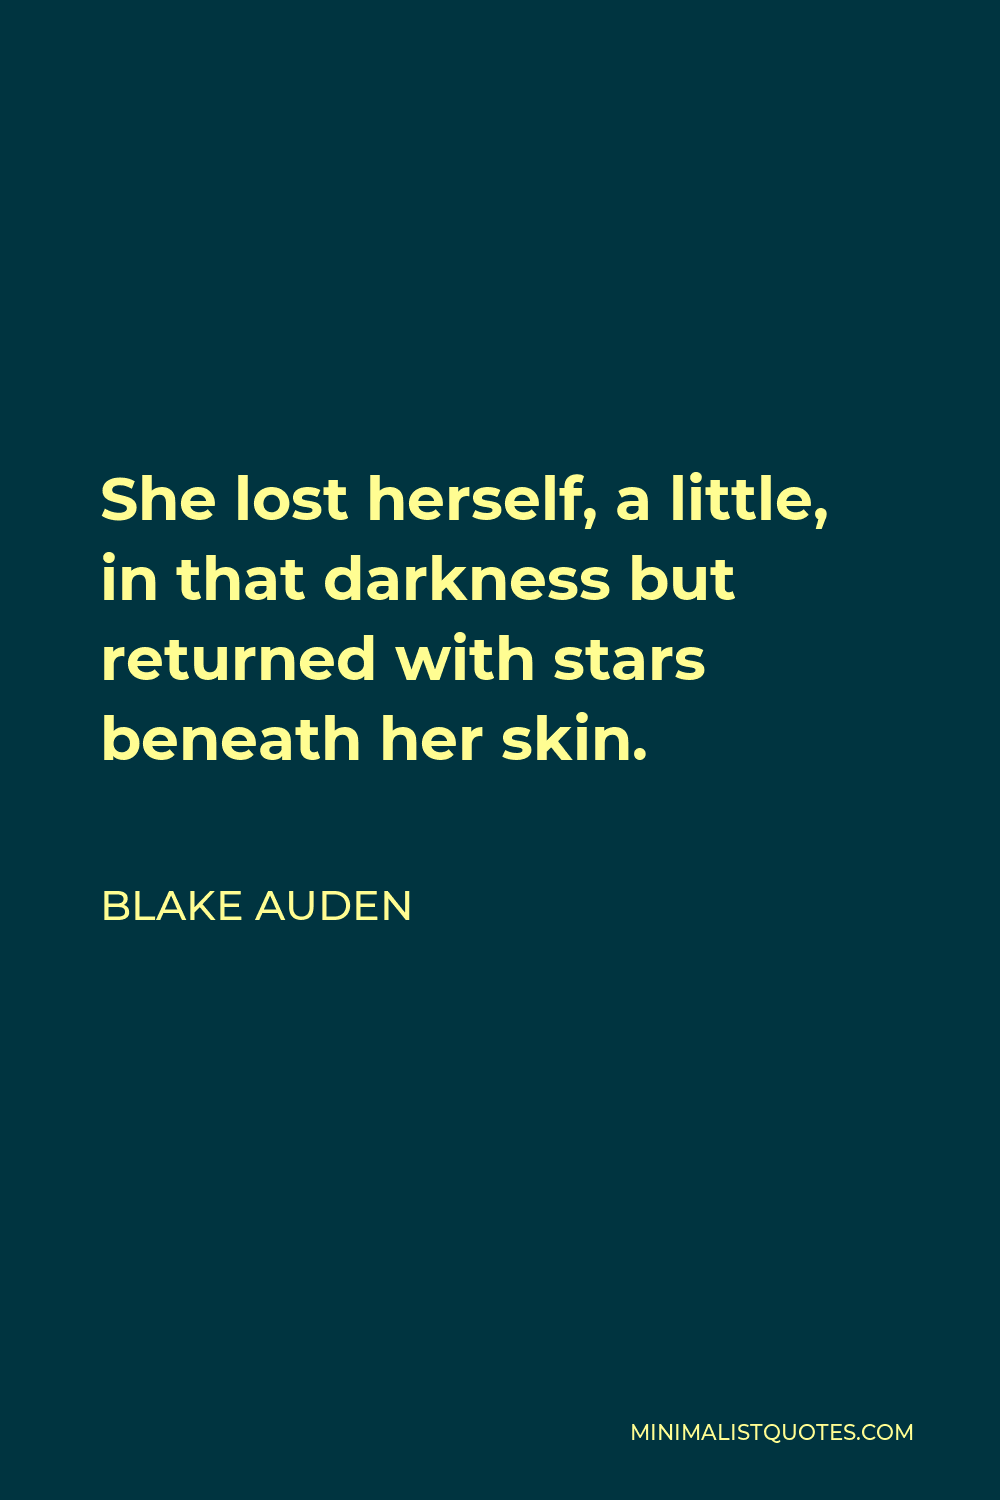 Blake Auden Quote - She lost herself, a little, in that darkness but returned with stars beneath her skin.